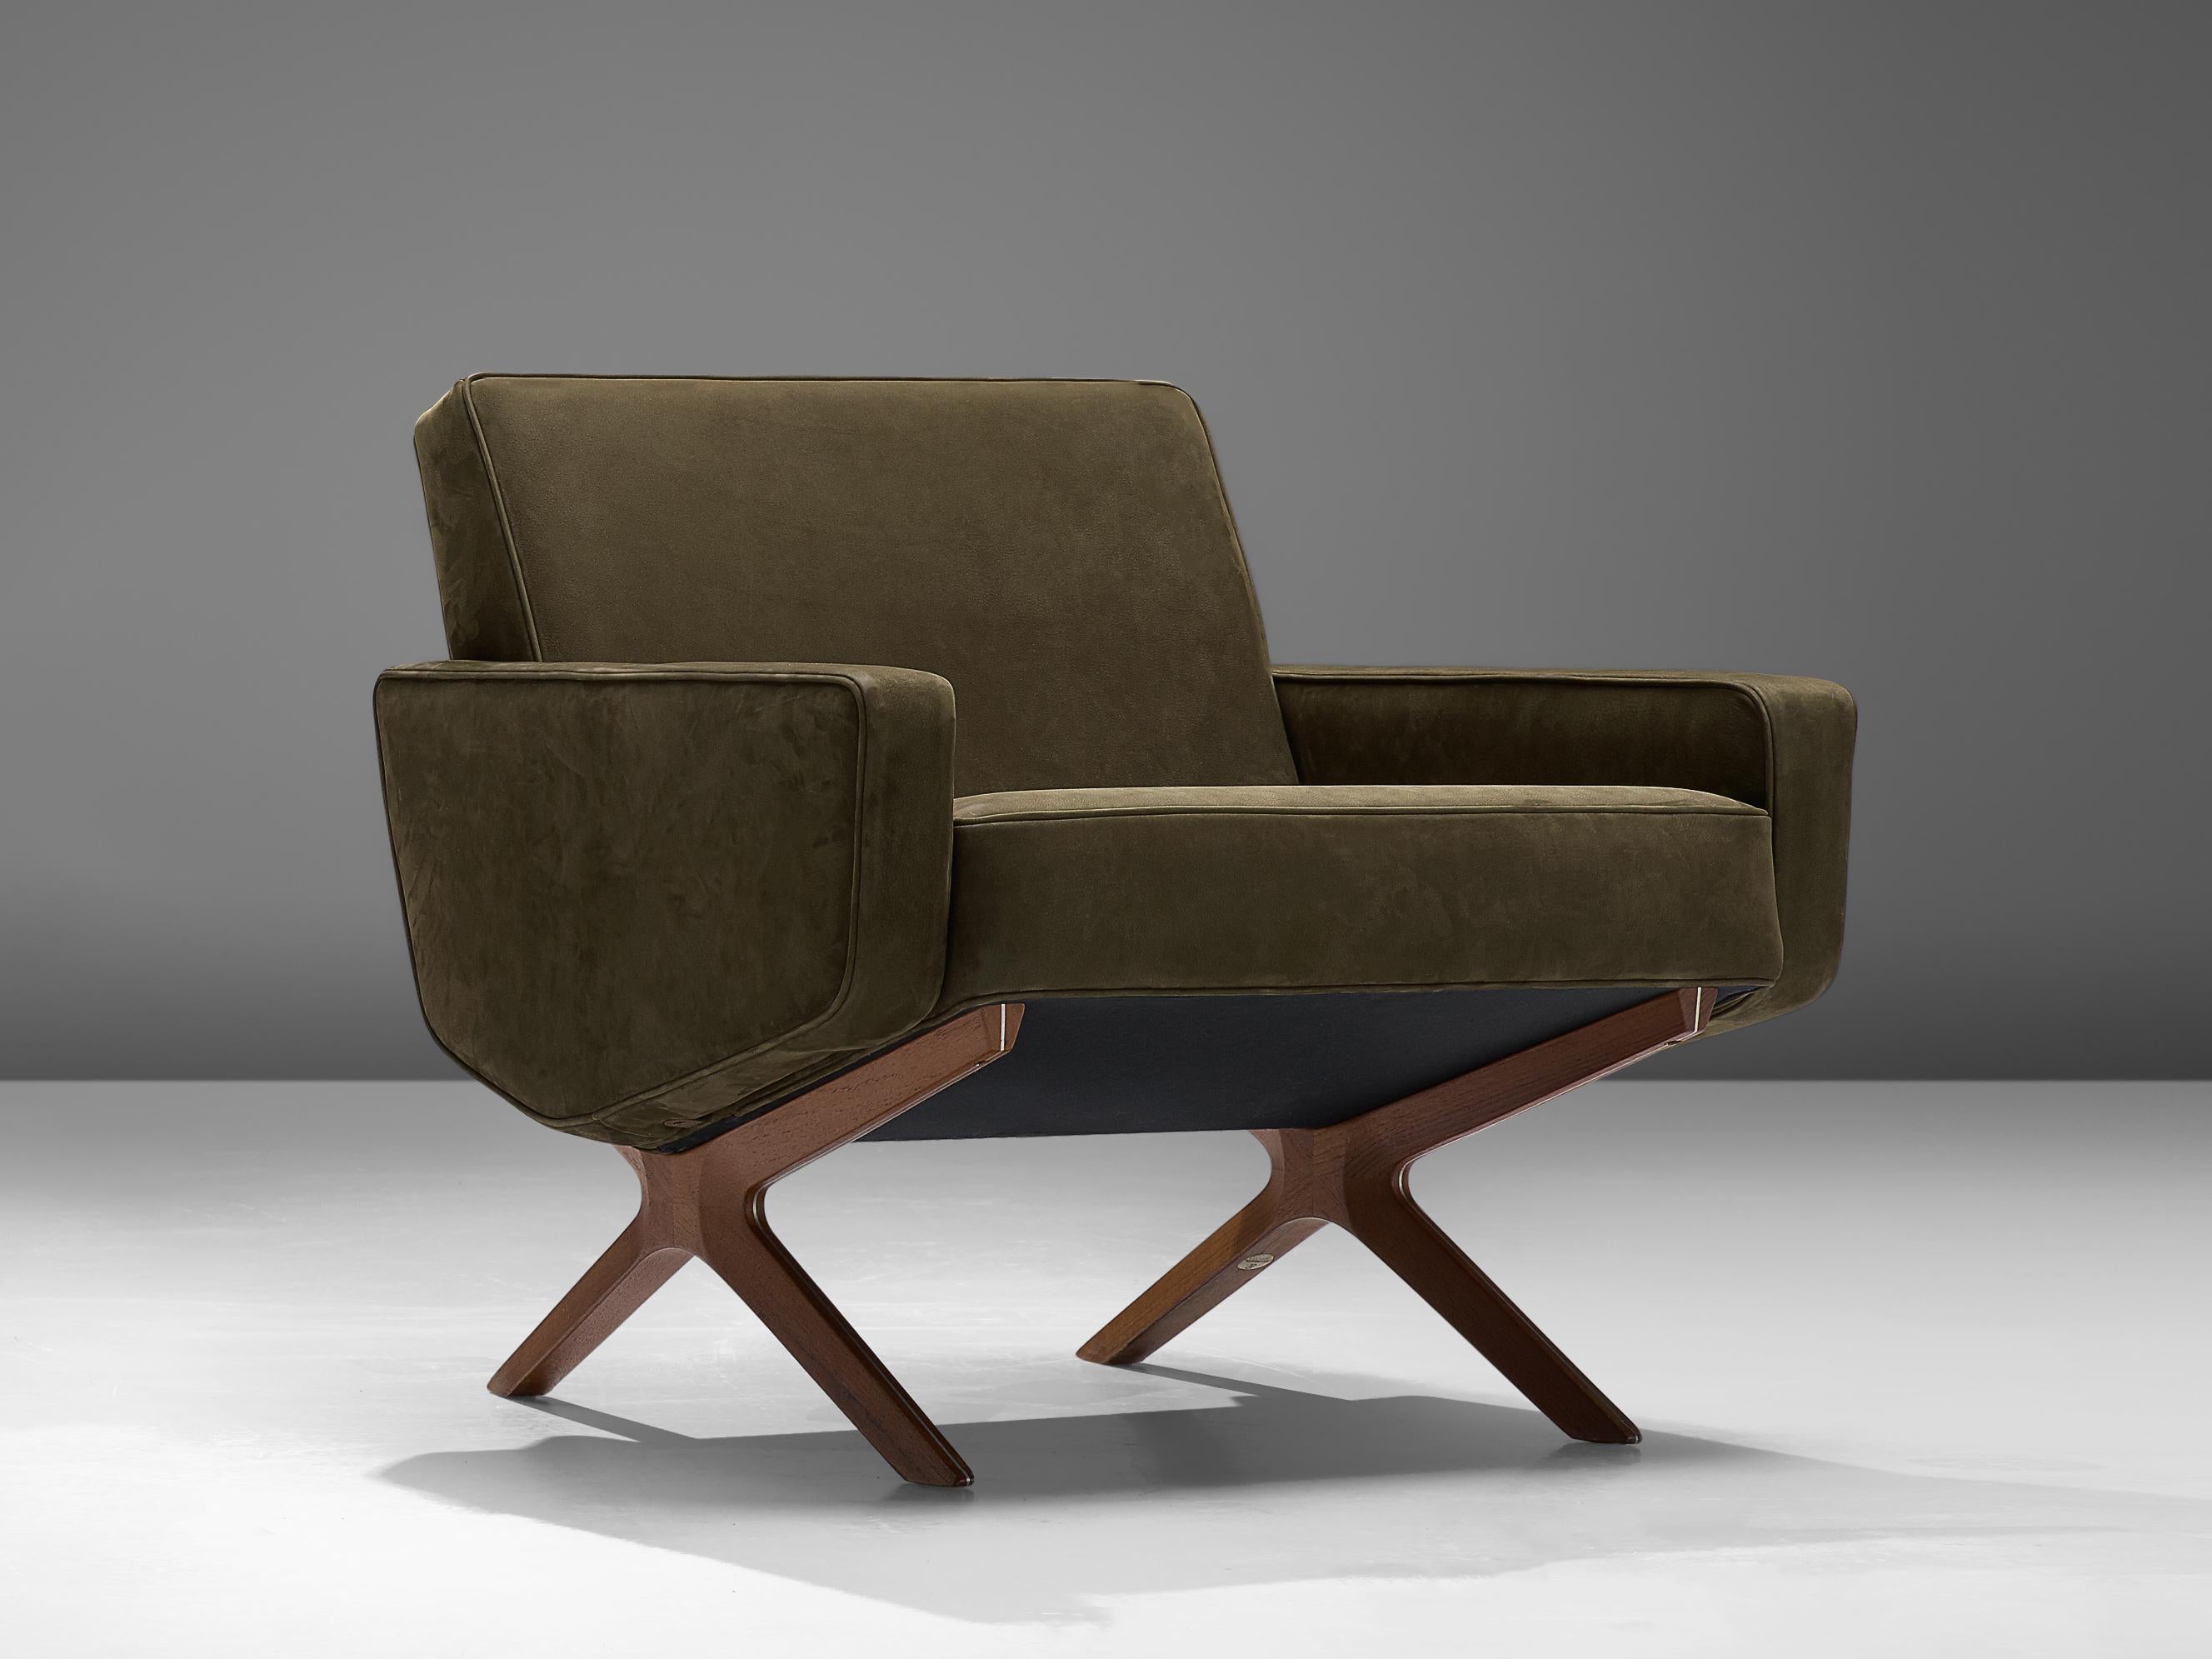 Peter Hvidt & Orla Mølgaard Nielsen for France & Søn, 'Silverline' lounge chair, Ohmann Colorado nubuck leather, teak, aluminum, Denmark, 1960s

Presenting a stylish lounge chair with an architectural flair designed by the Danish duo Peter Hvidt &